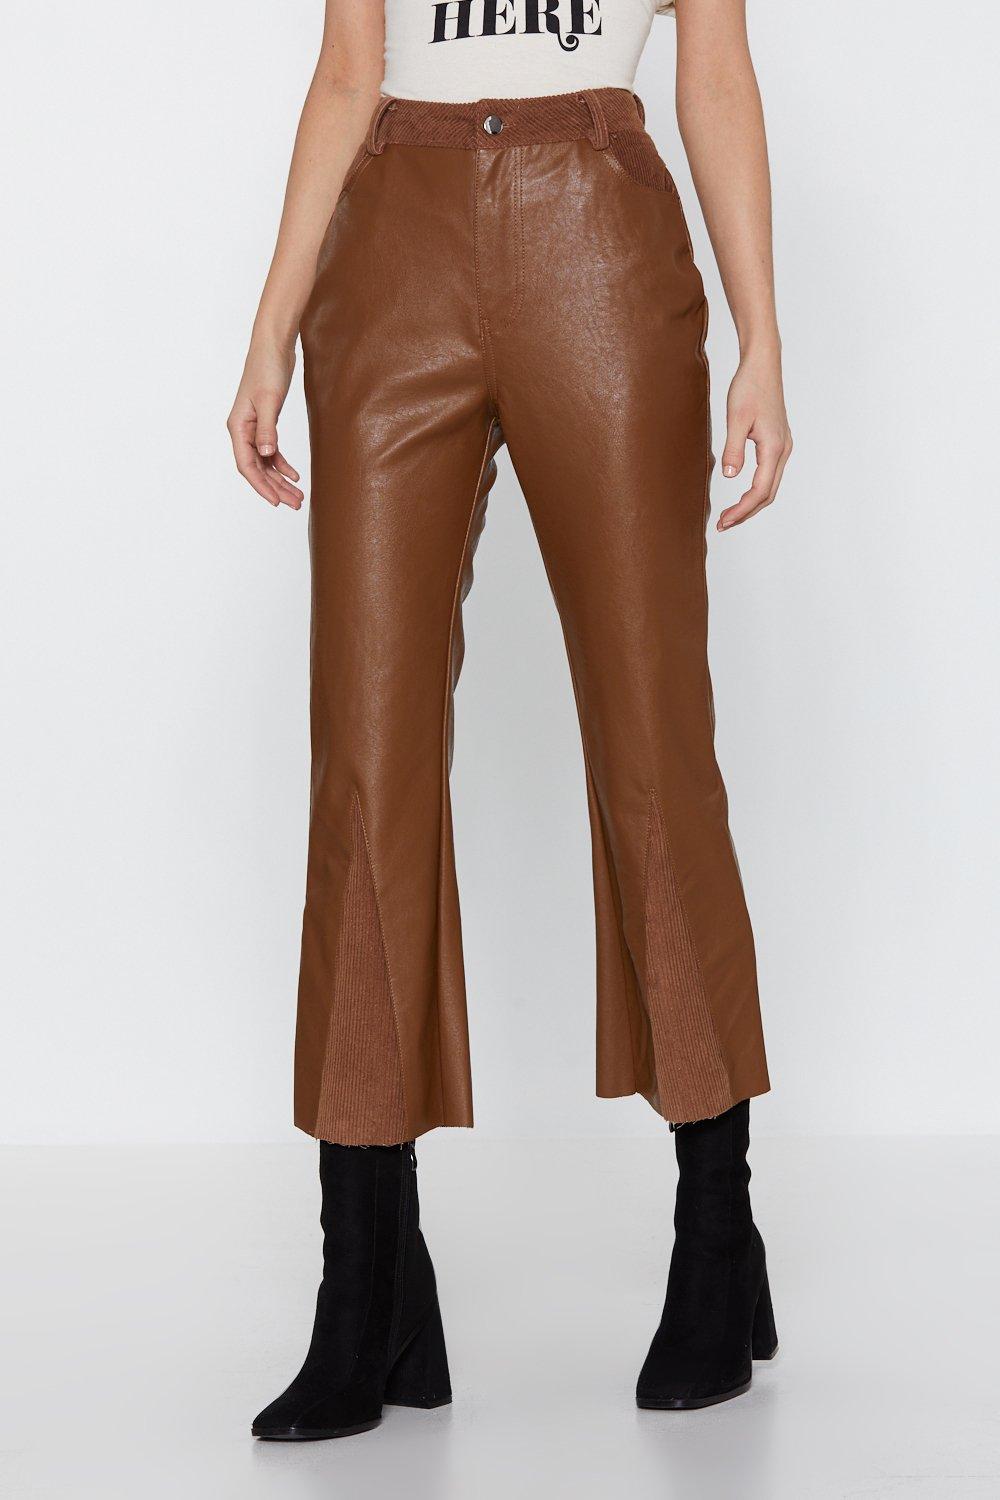 brown leather trousers